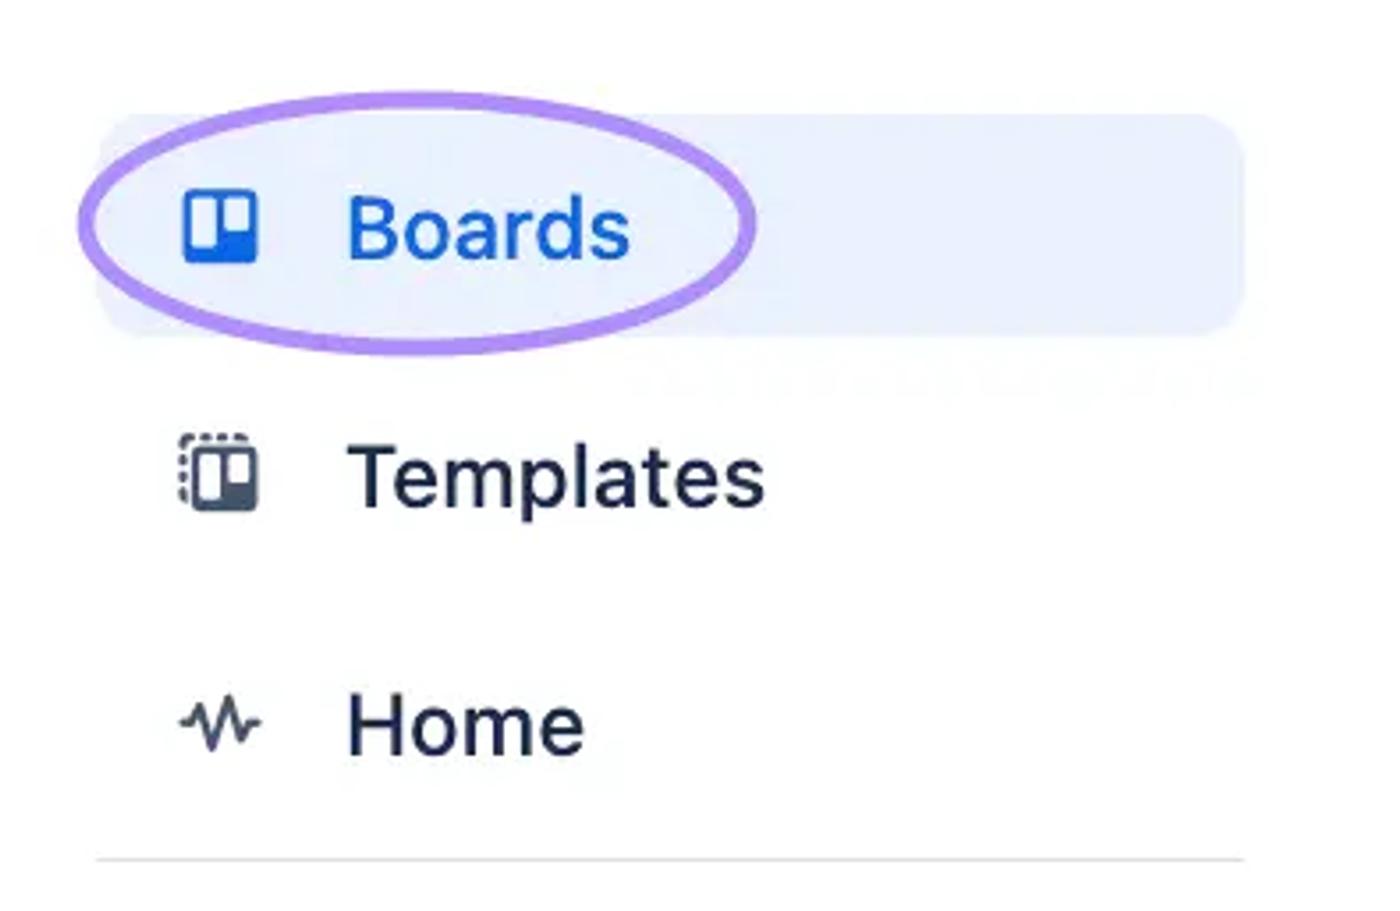 Links to Boards and Templates in the Trello homepage